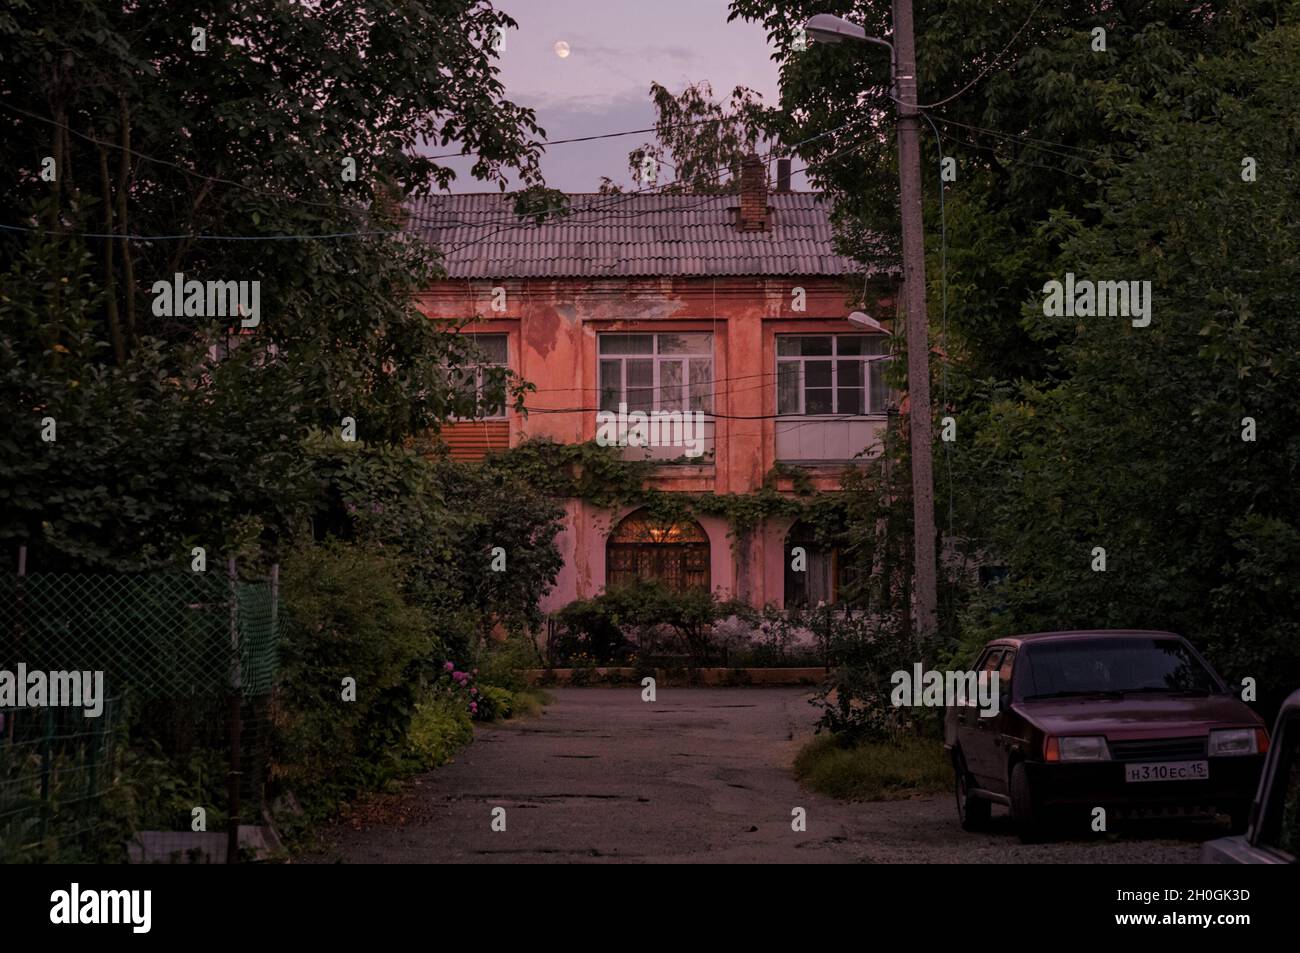 VLADIKAVKAZ, RUSSIA - 07 21 2021: Small town old two-story house yard drowned in greenery with an old LADA car parked on the roadside in the dusk Stock Photo